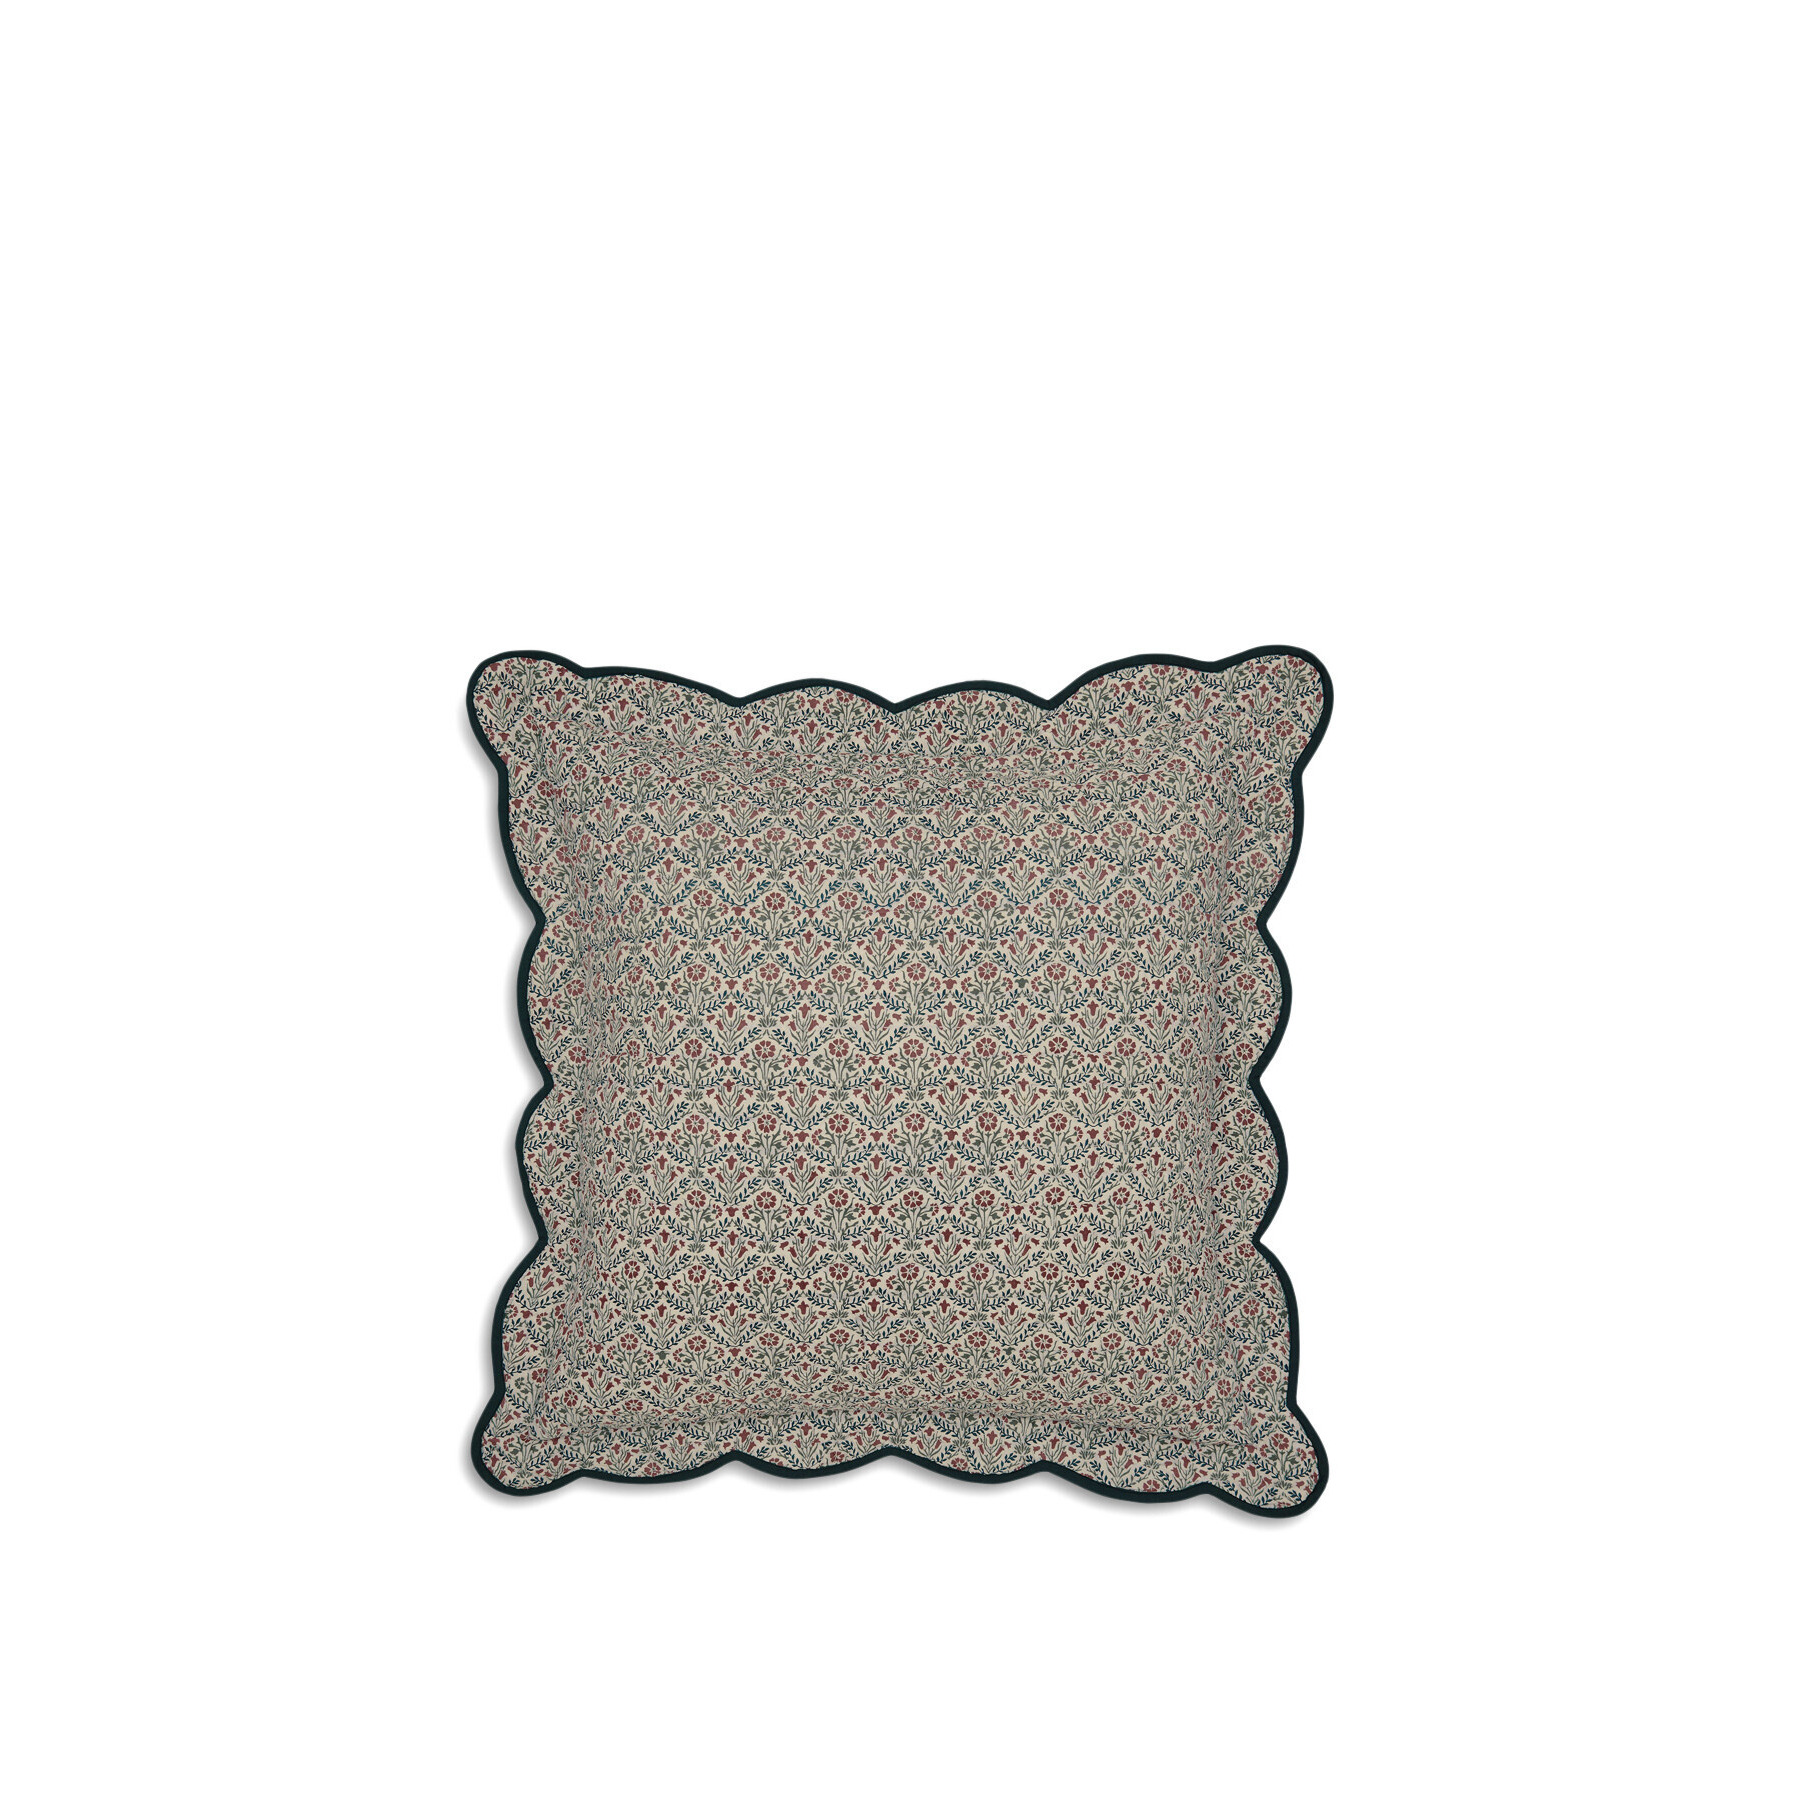 Morris & Co Brophy Embroidery Sham Pillow - Size Square Green - image 1